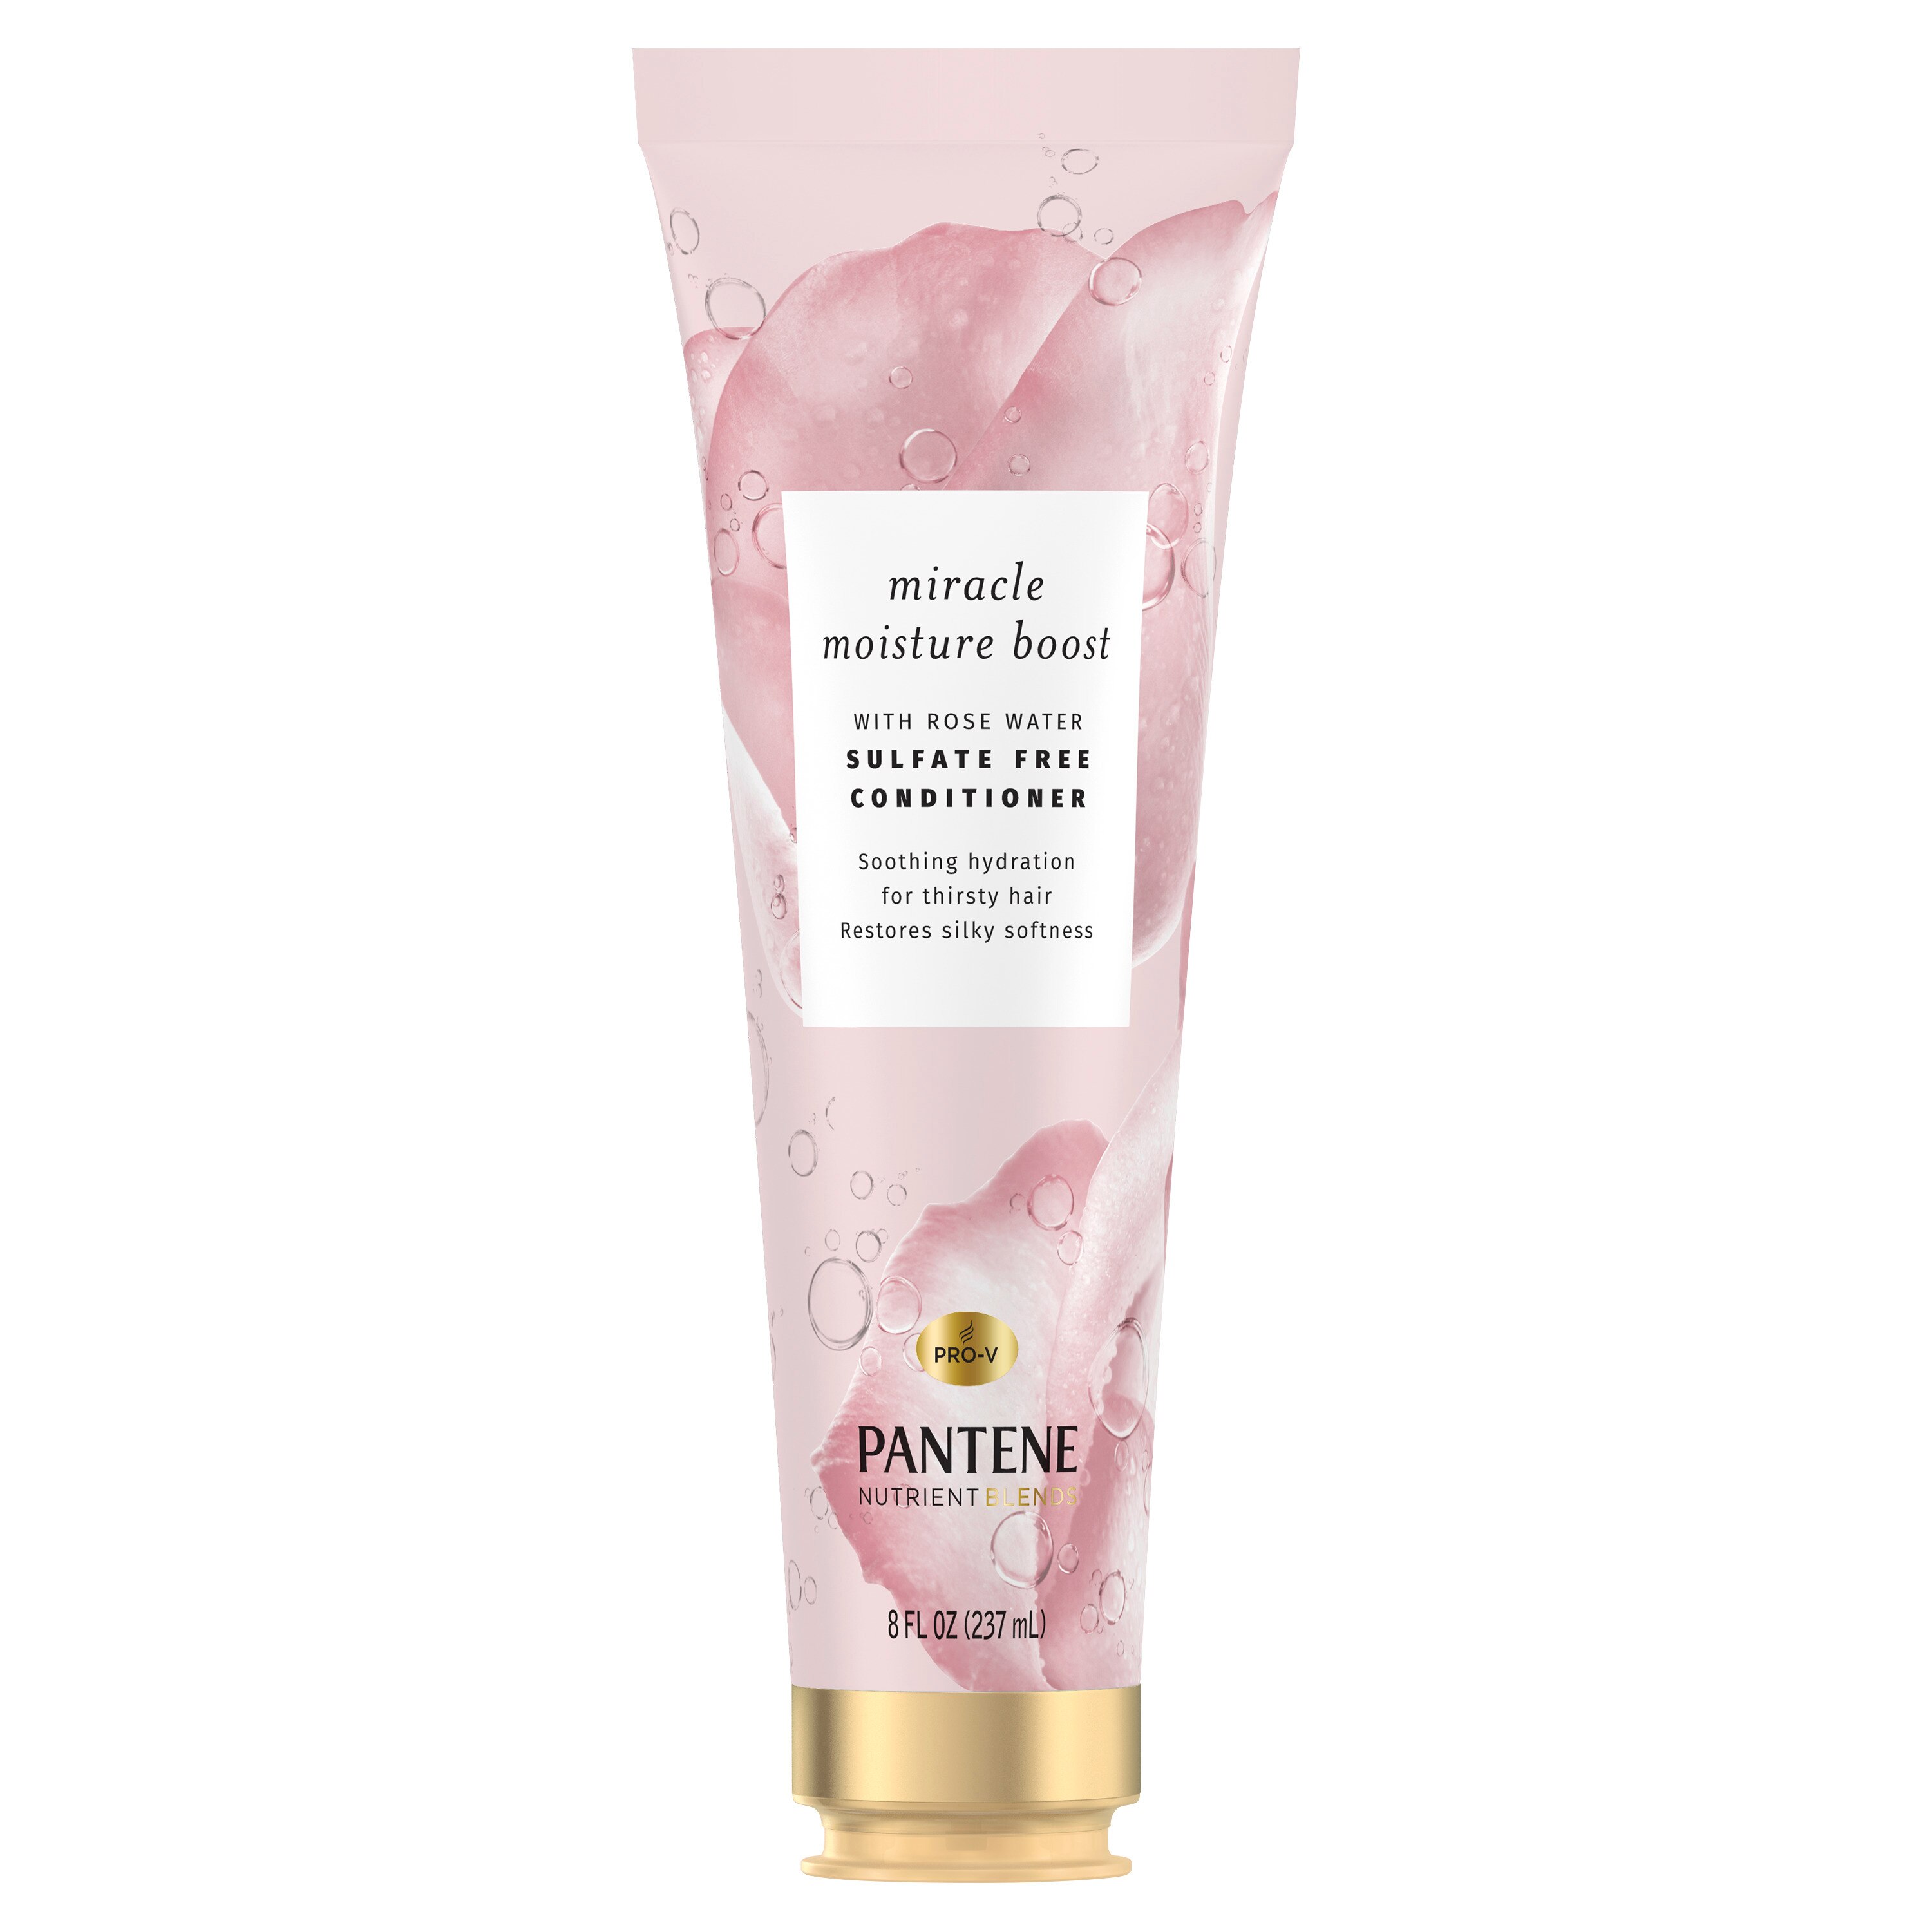 Pantene Pro-V Pantene Nutrient Blends Miracle Moisture Boost Conditioner With Rose Water, 8 Oz , CVS